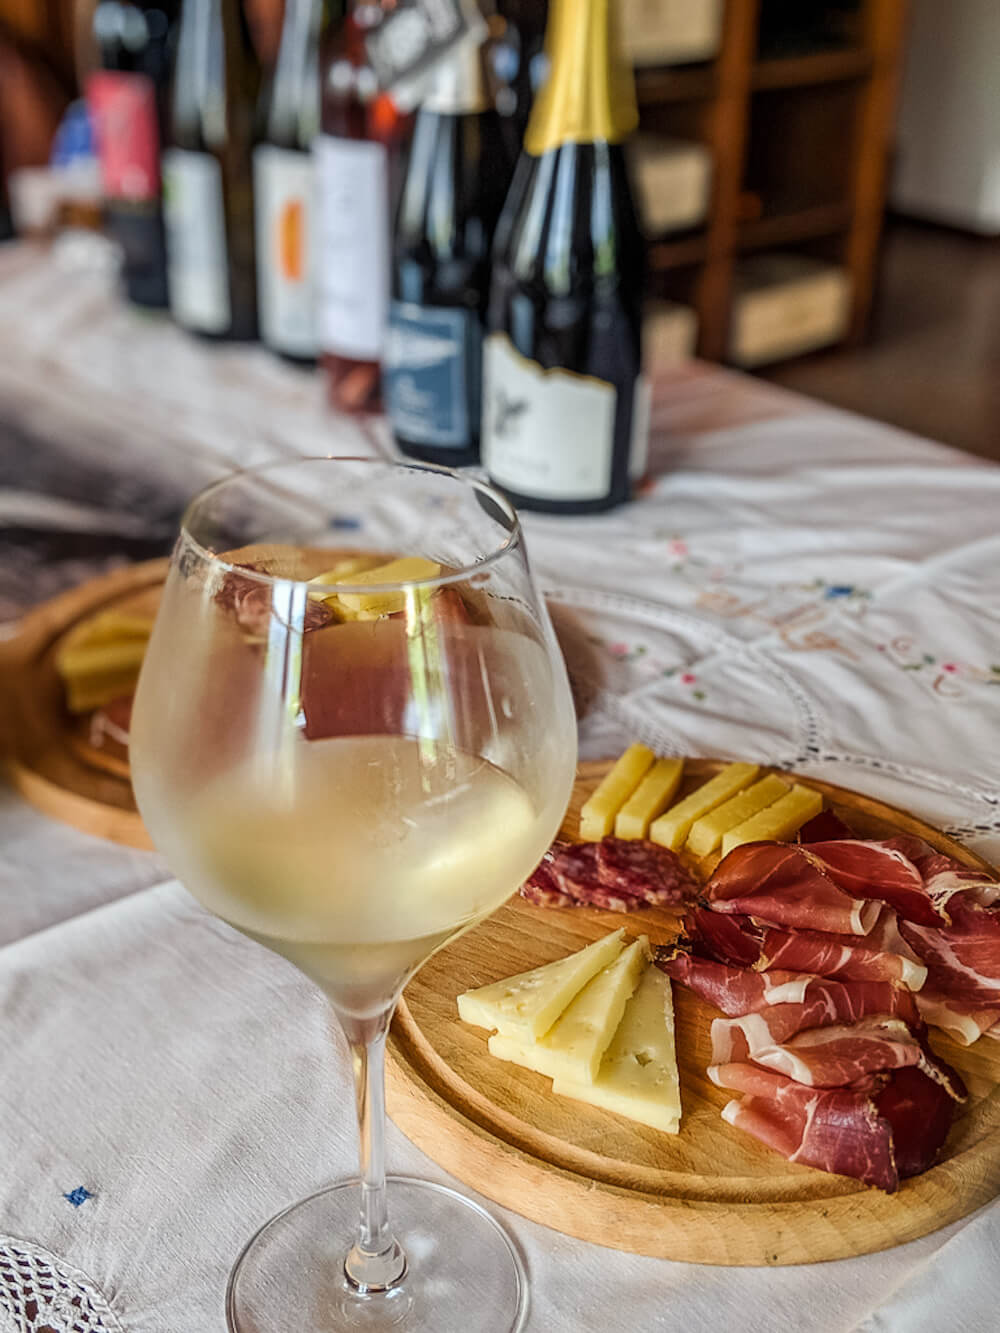 Local wine is one of the best souvenirs in Spain to take home